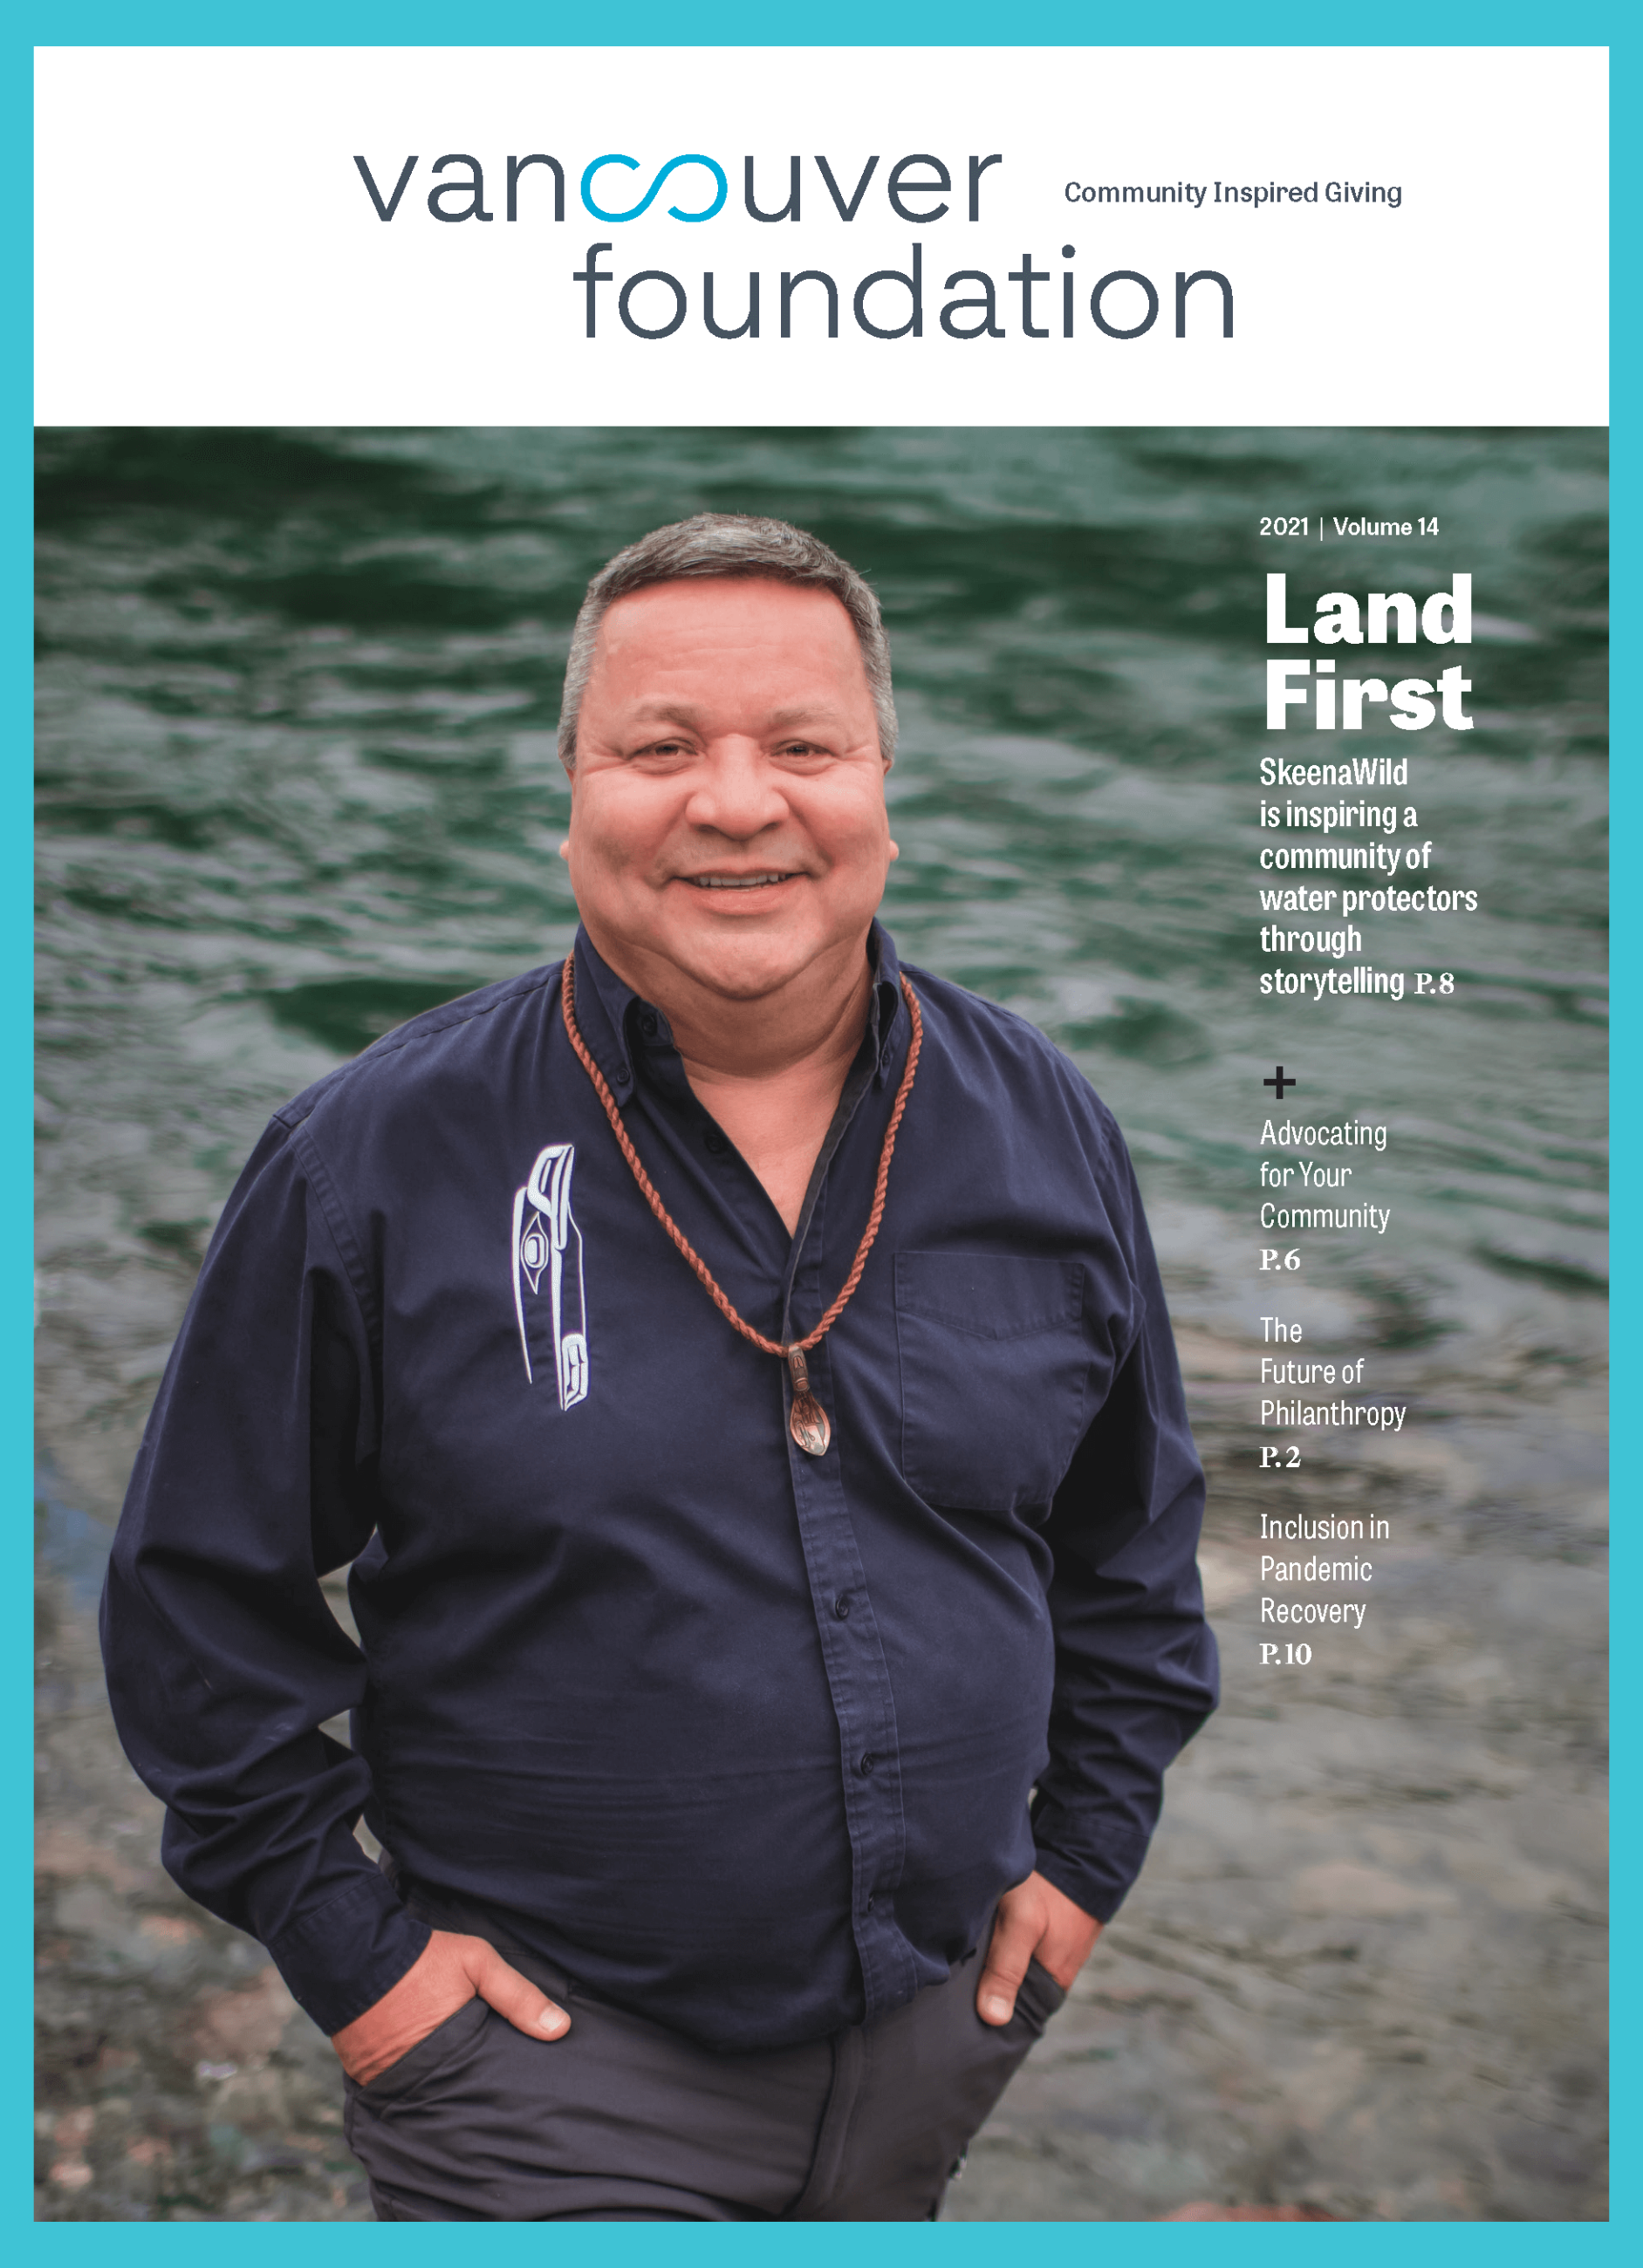 Cover photo of Vancouver Foundation Magazine.